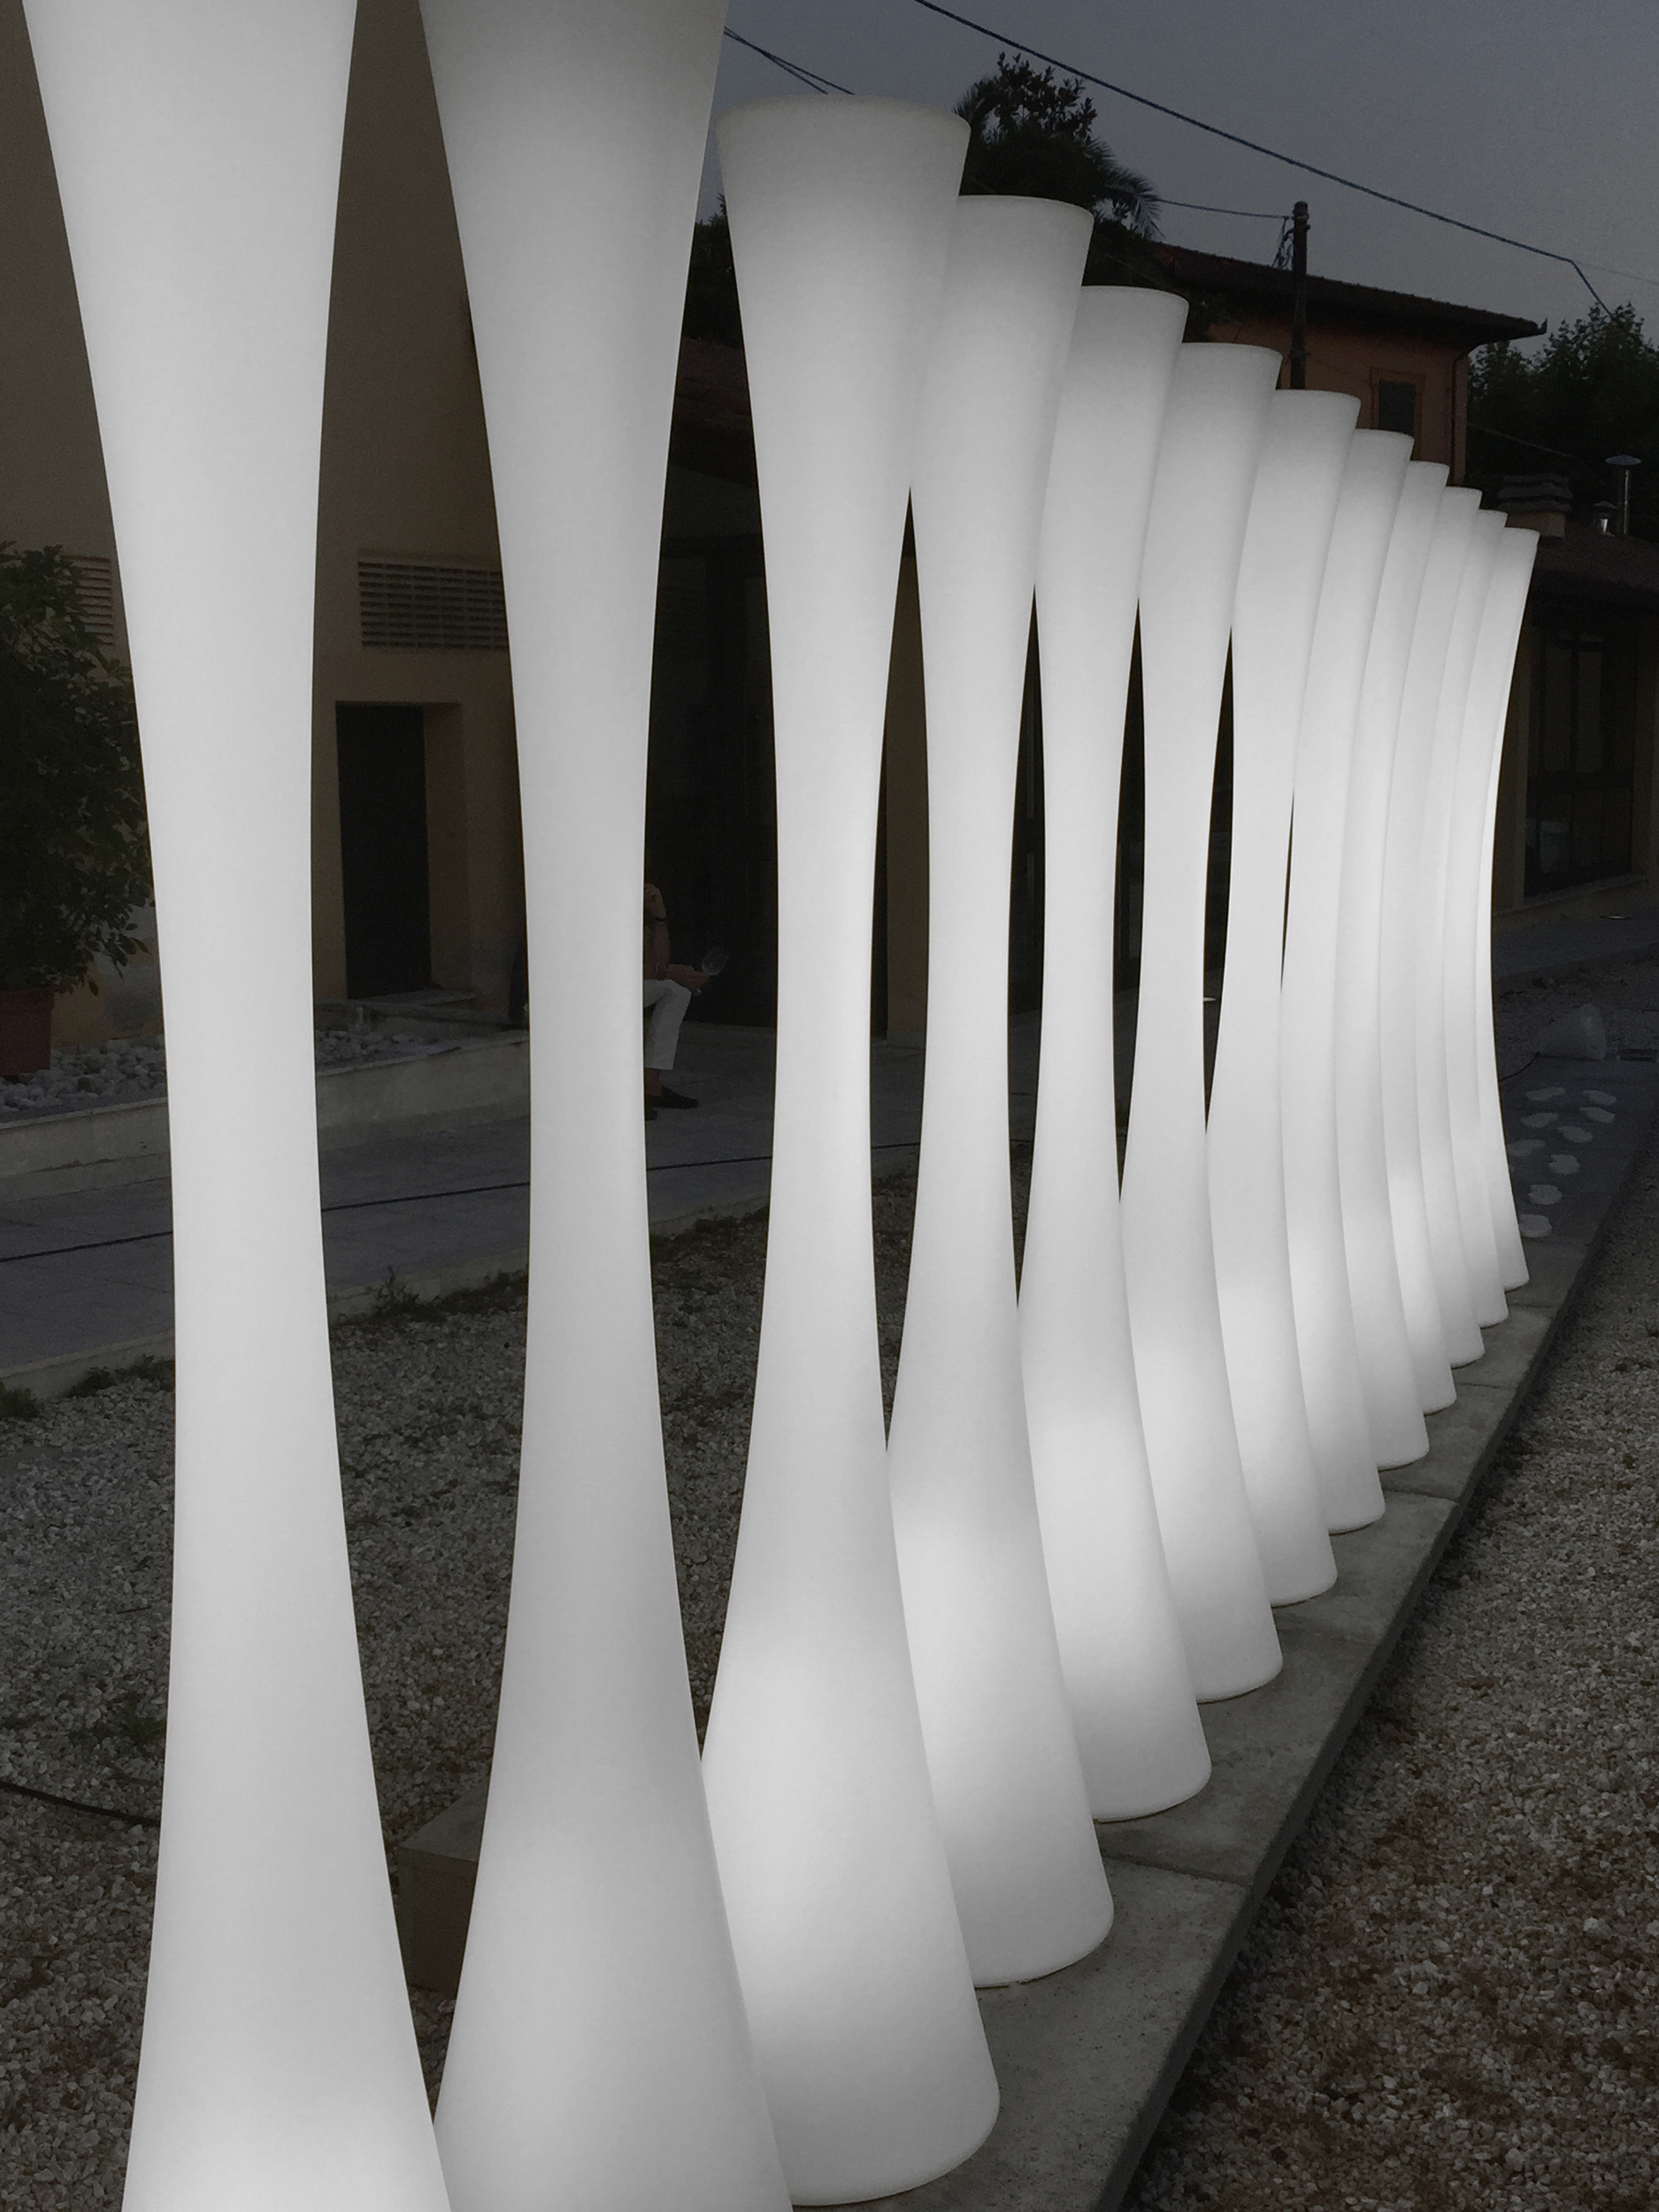 Emiliana Martinelli, the Abstraction of a White Noise. A new light installation at MuSa in Pietrasanta